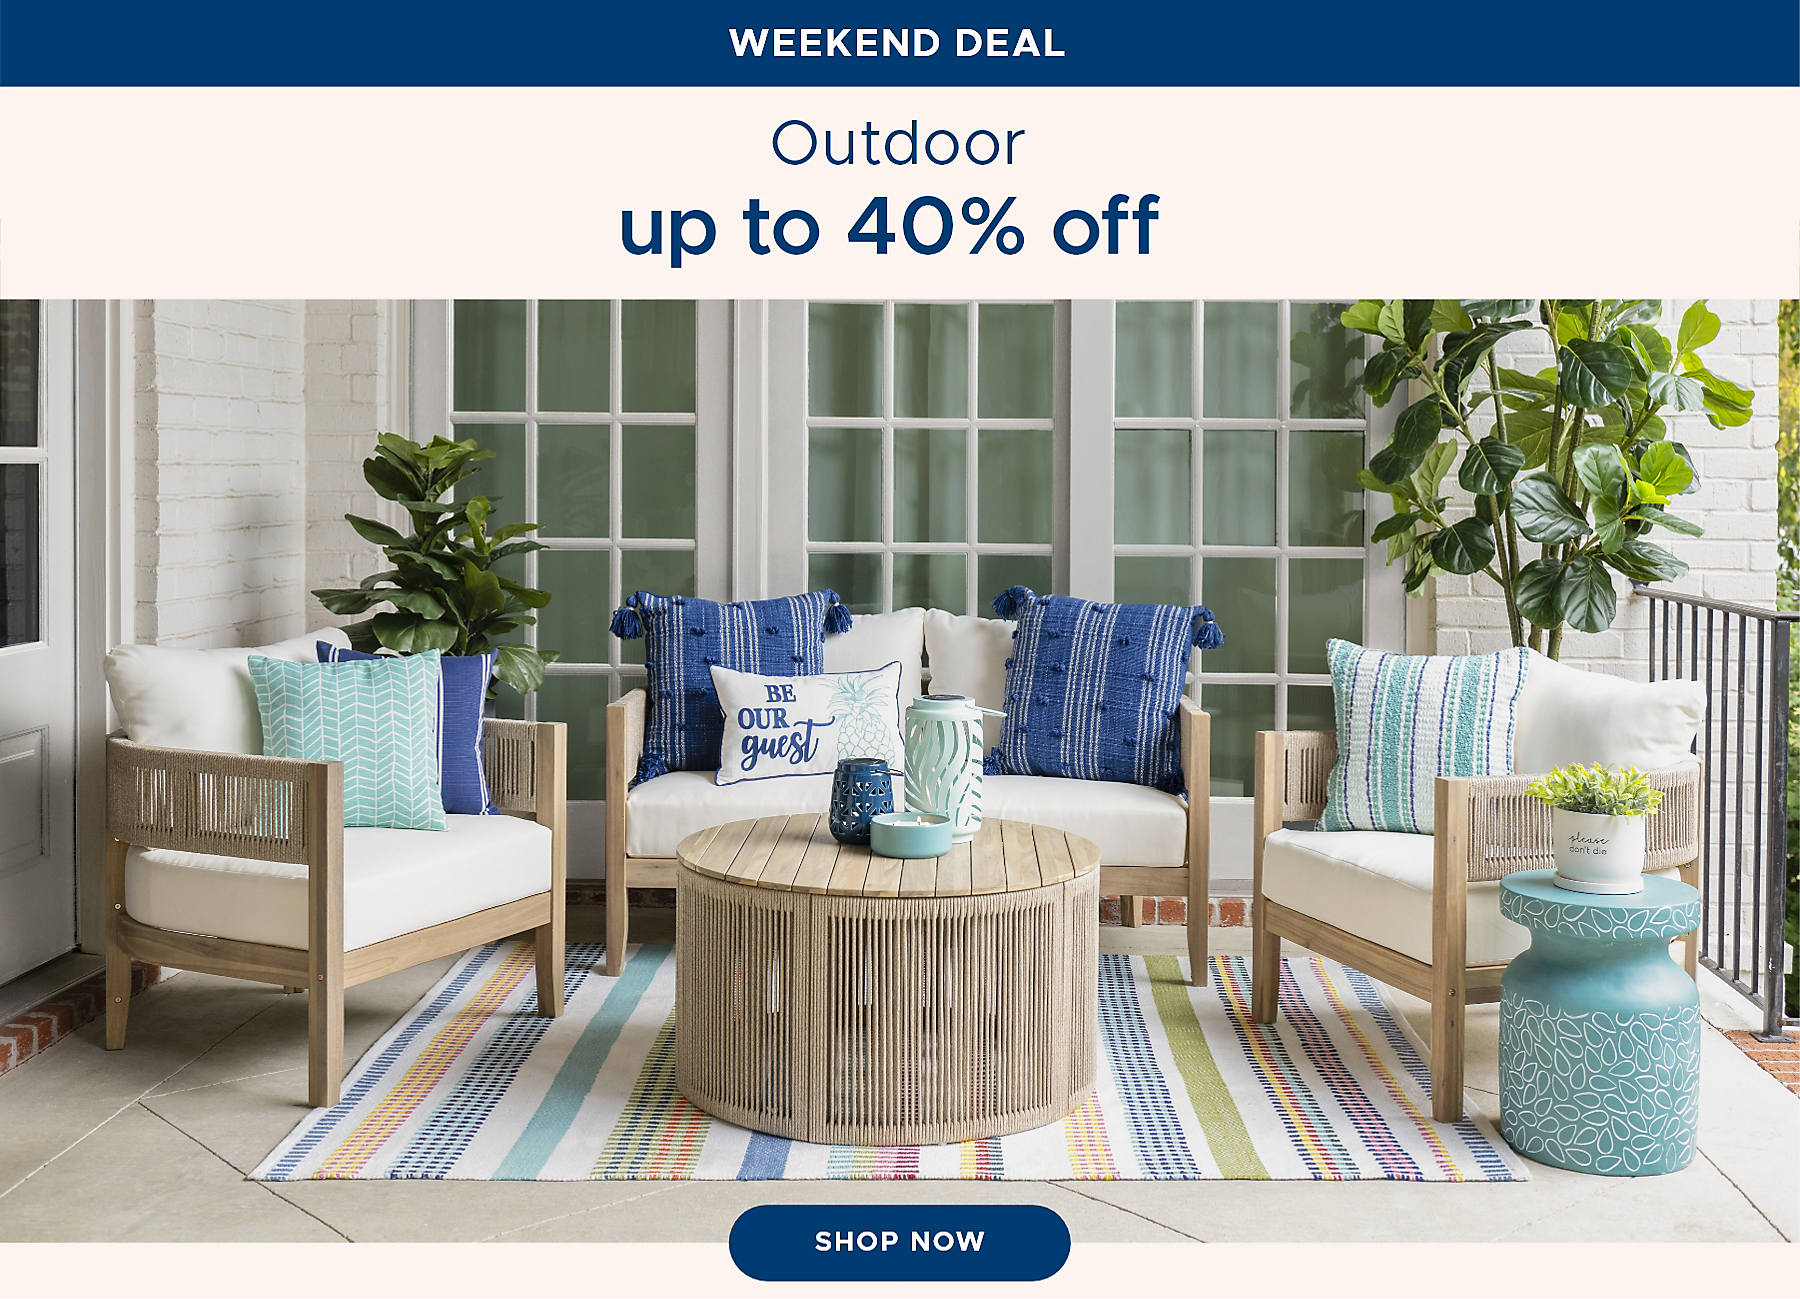 Weekend Deal Outdoor up to 40% off shop now